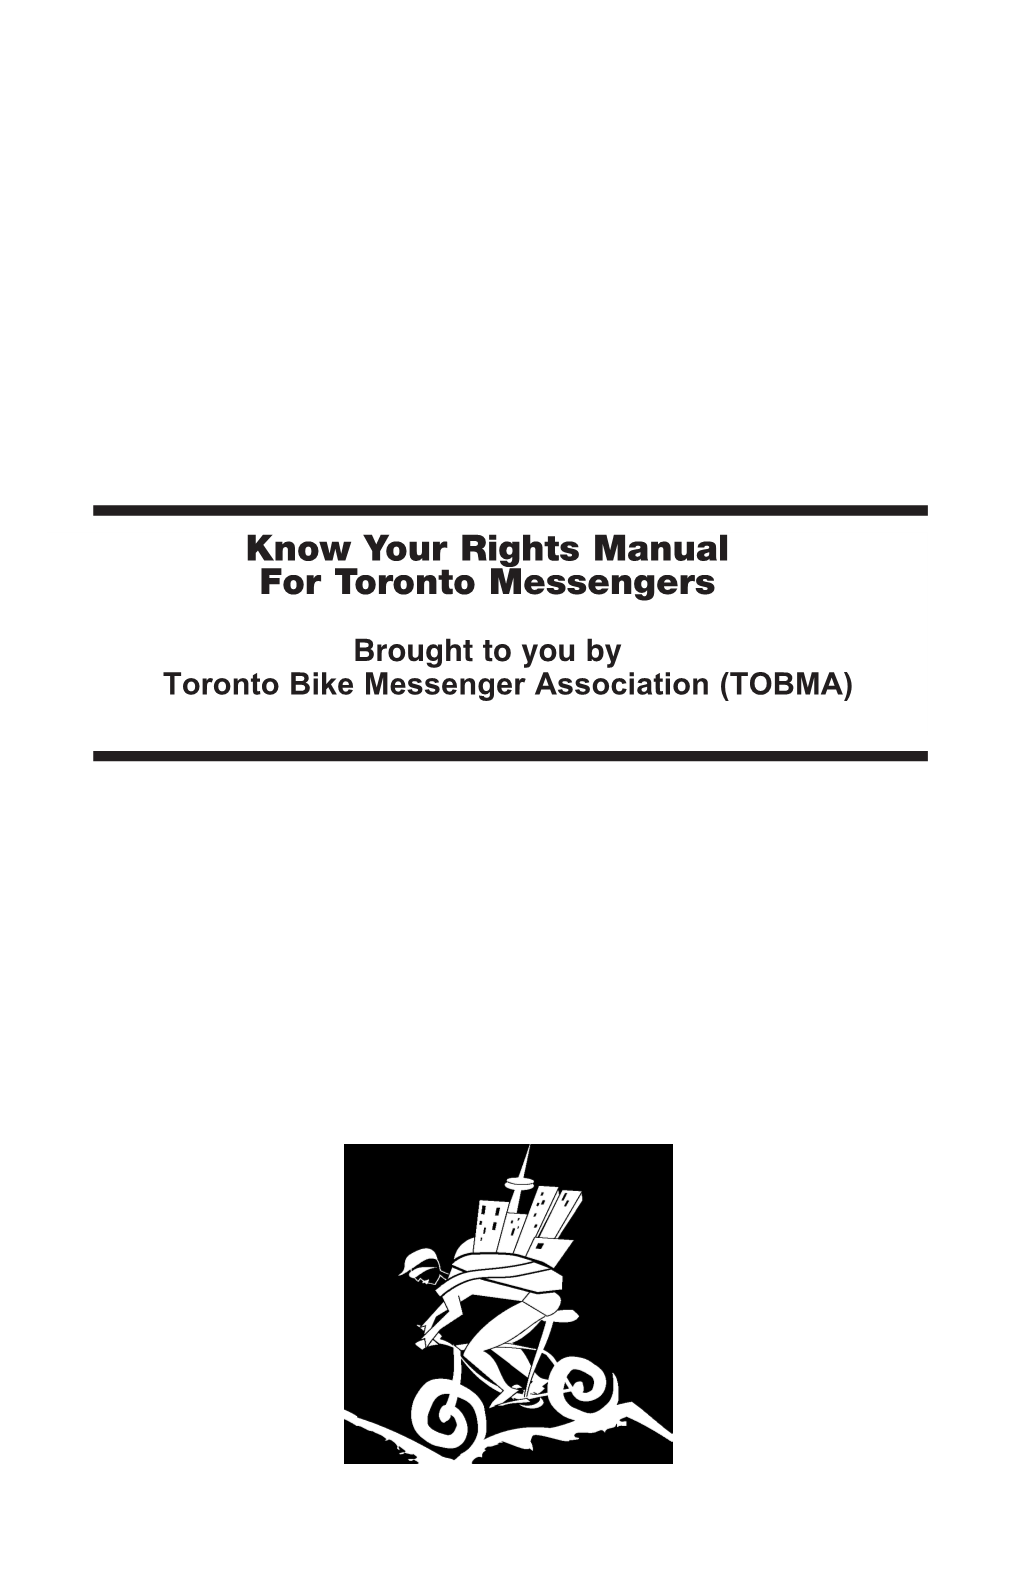 Know Your Rights Manual for Toronto Messengers